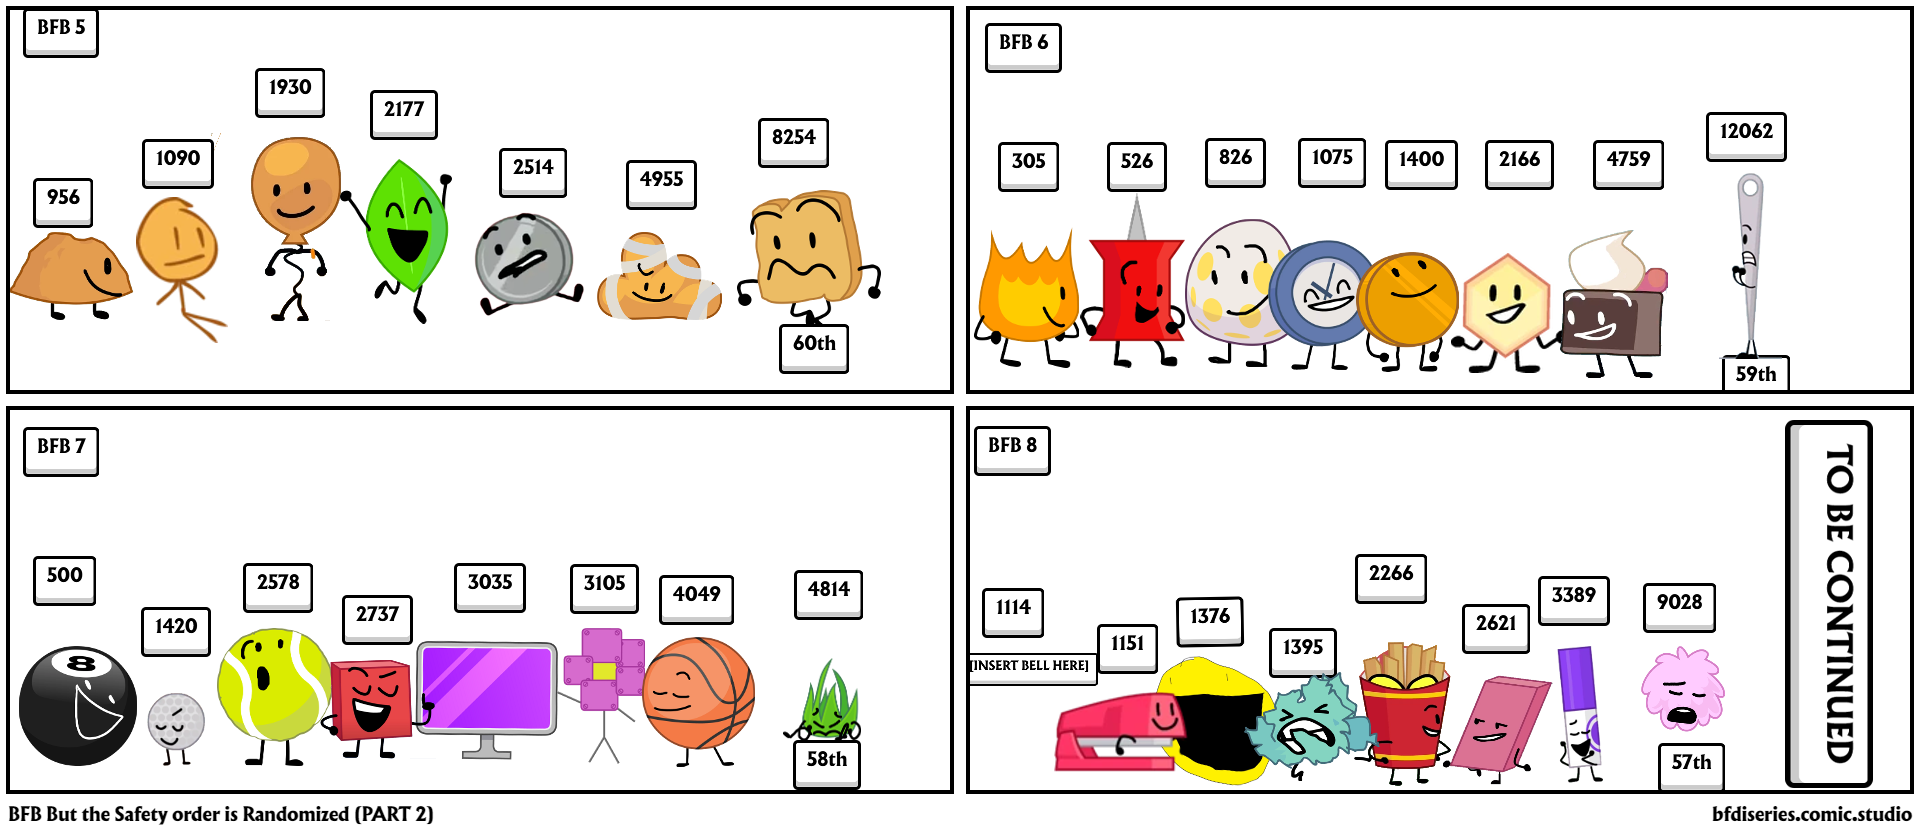 BFB But the Safety order is Randomized (PART 2)